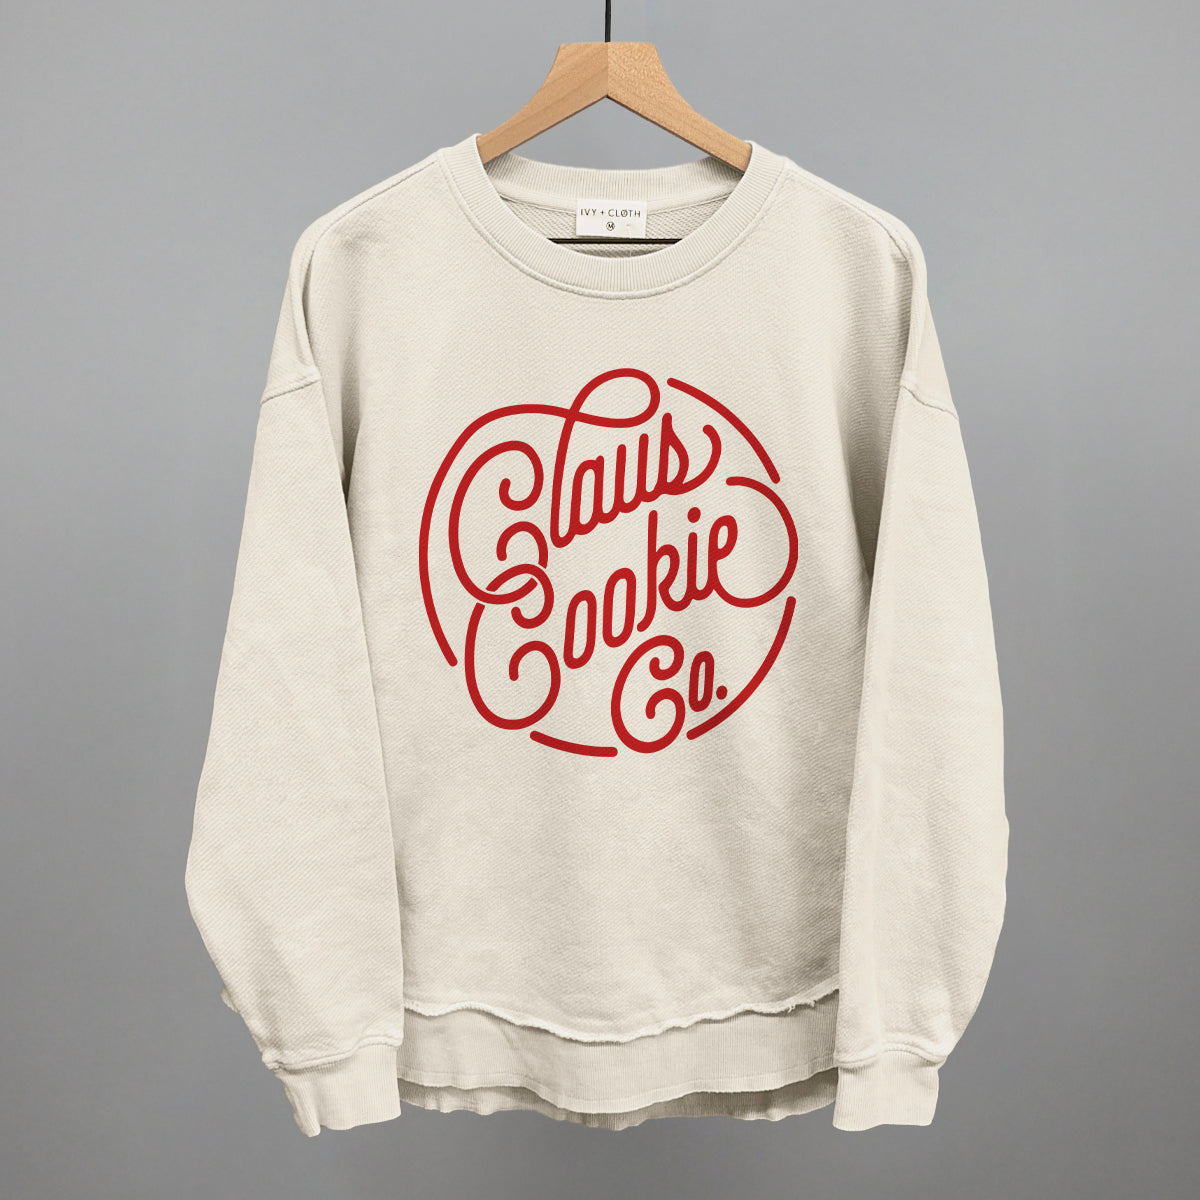 Claus Cookie Co (Red)